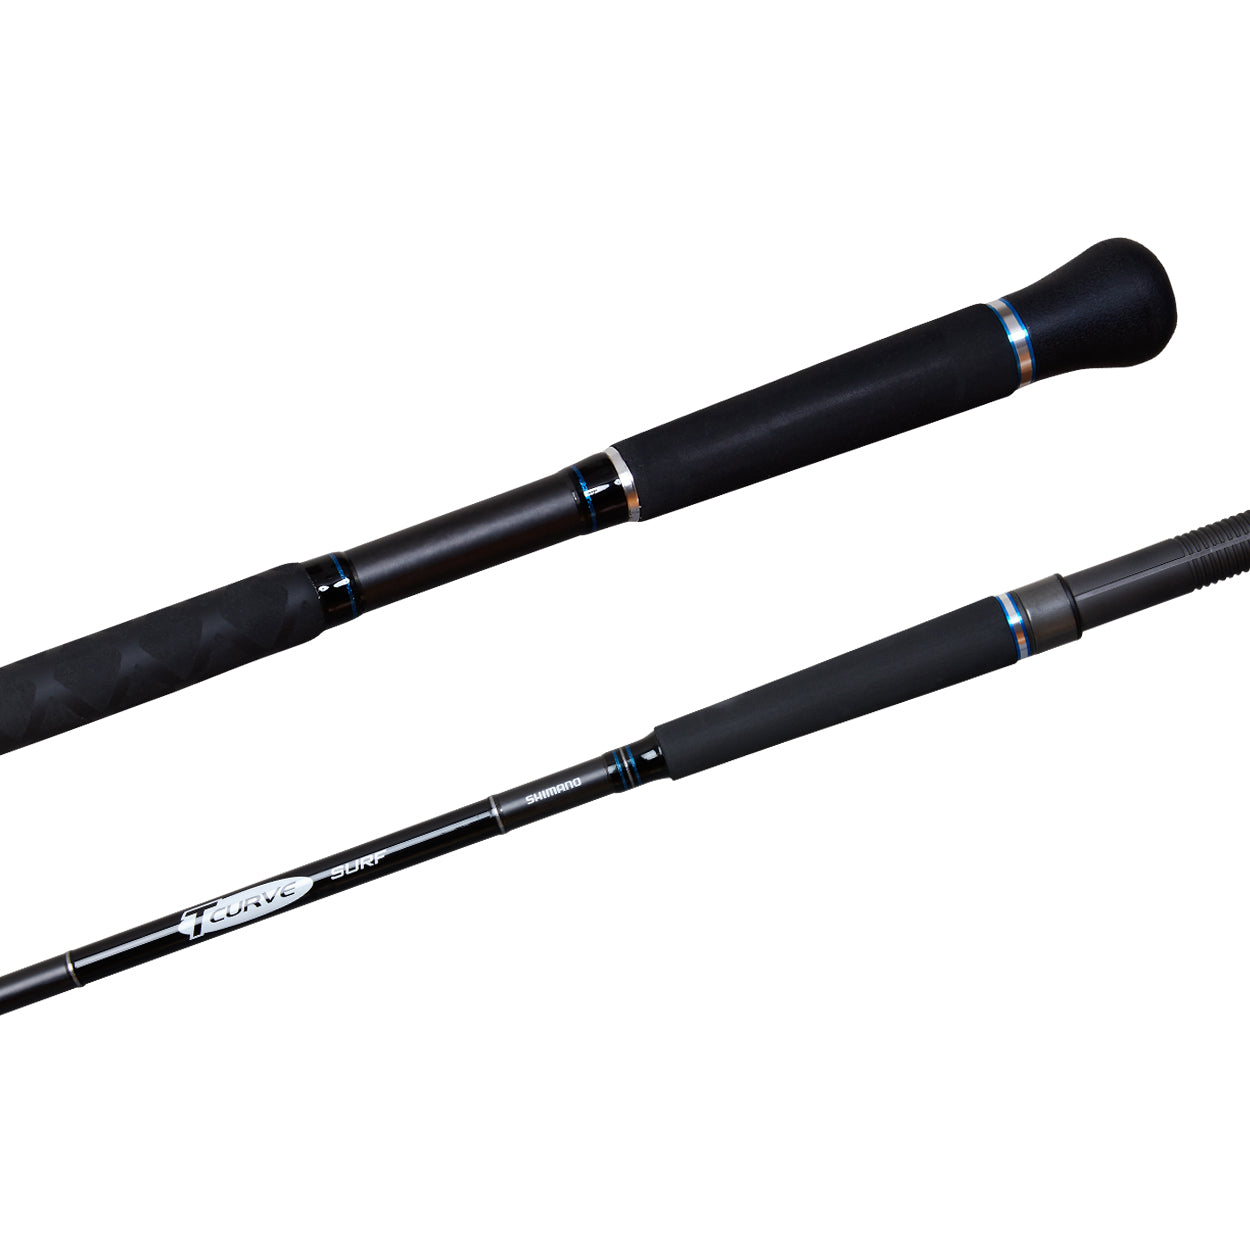 Shop for Fishing Gear Online - Rods, Reels, Lures & more Page 33